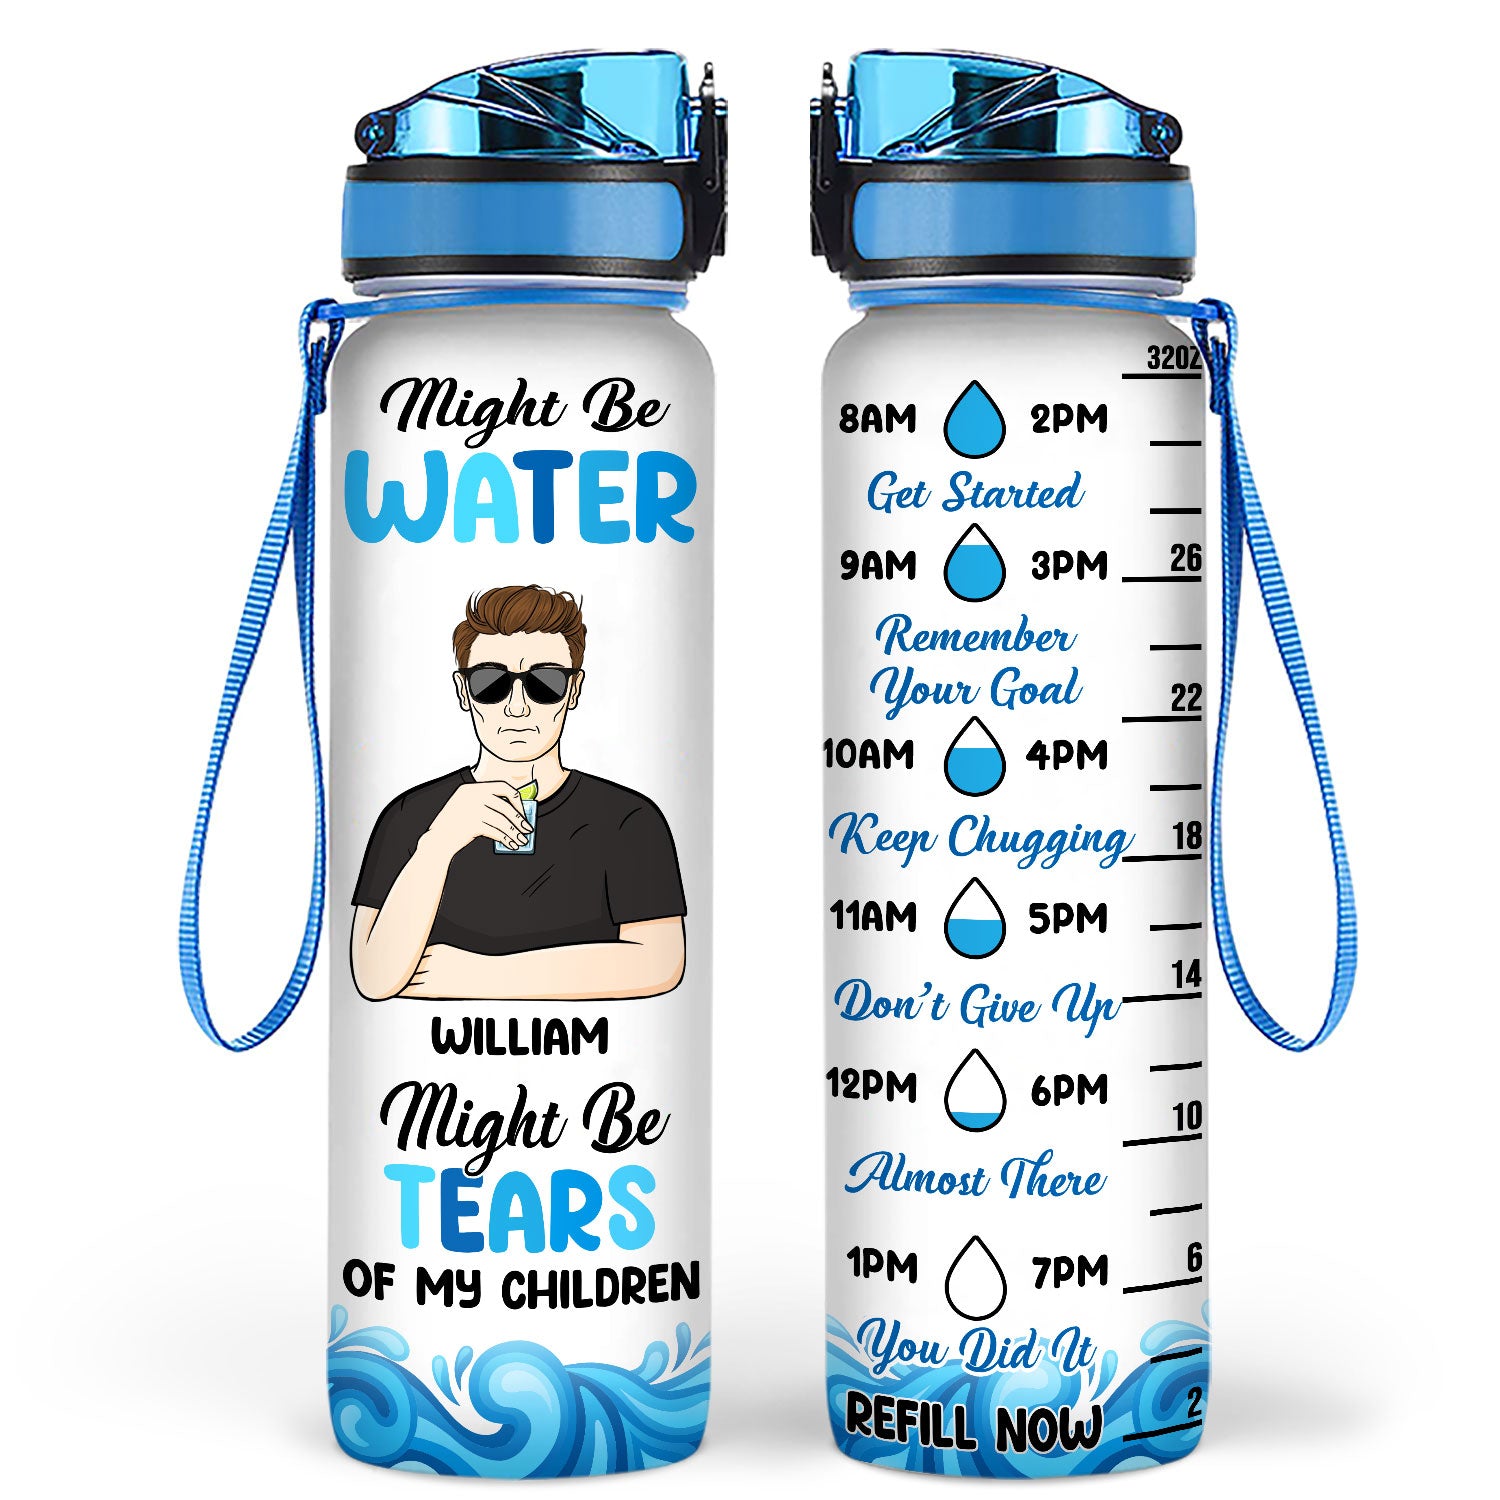 Tears Of My Children - Gift For Father, Mother - Personalized Custom Water Tracker Bottle